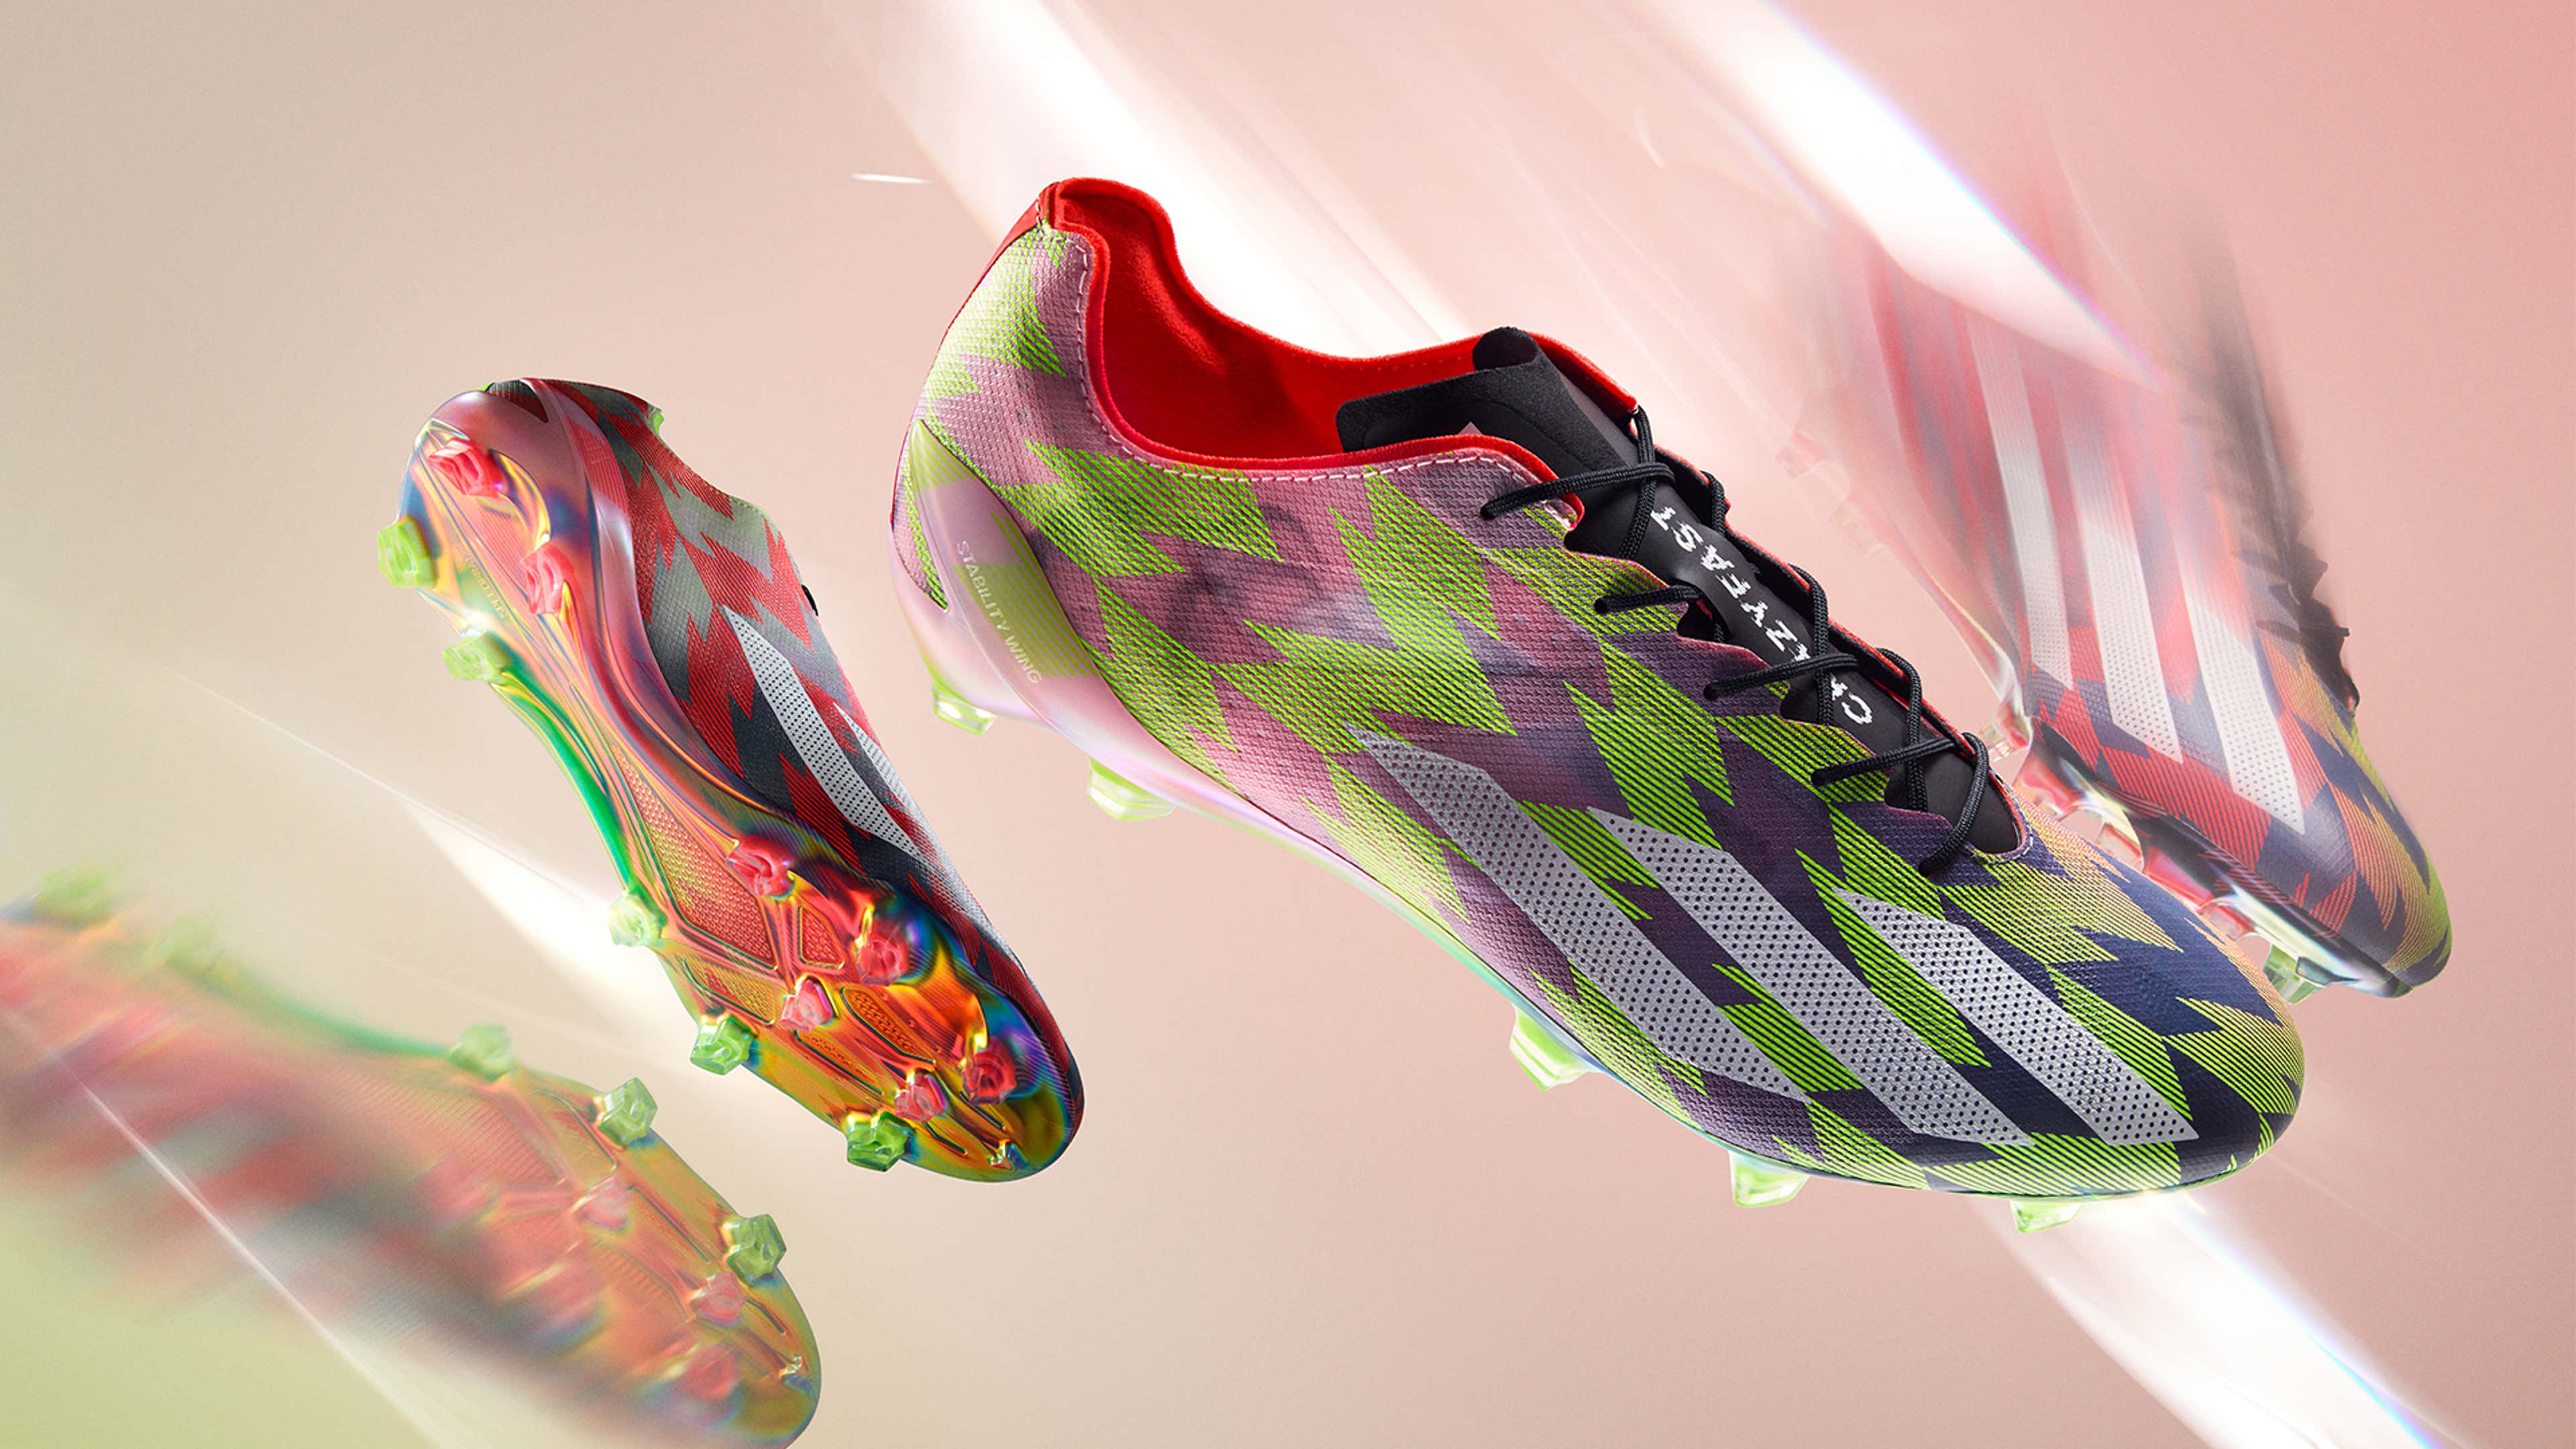 oase Bageri grinende adidas launches the X Crazylight boot ahead of the UEFA Champions League  Final | Goal.com US